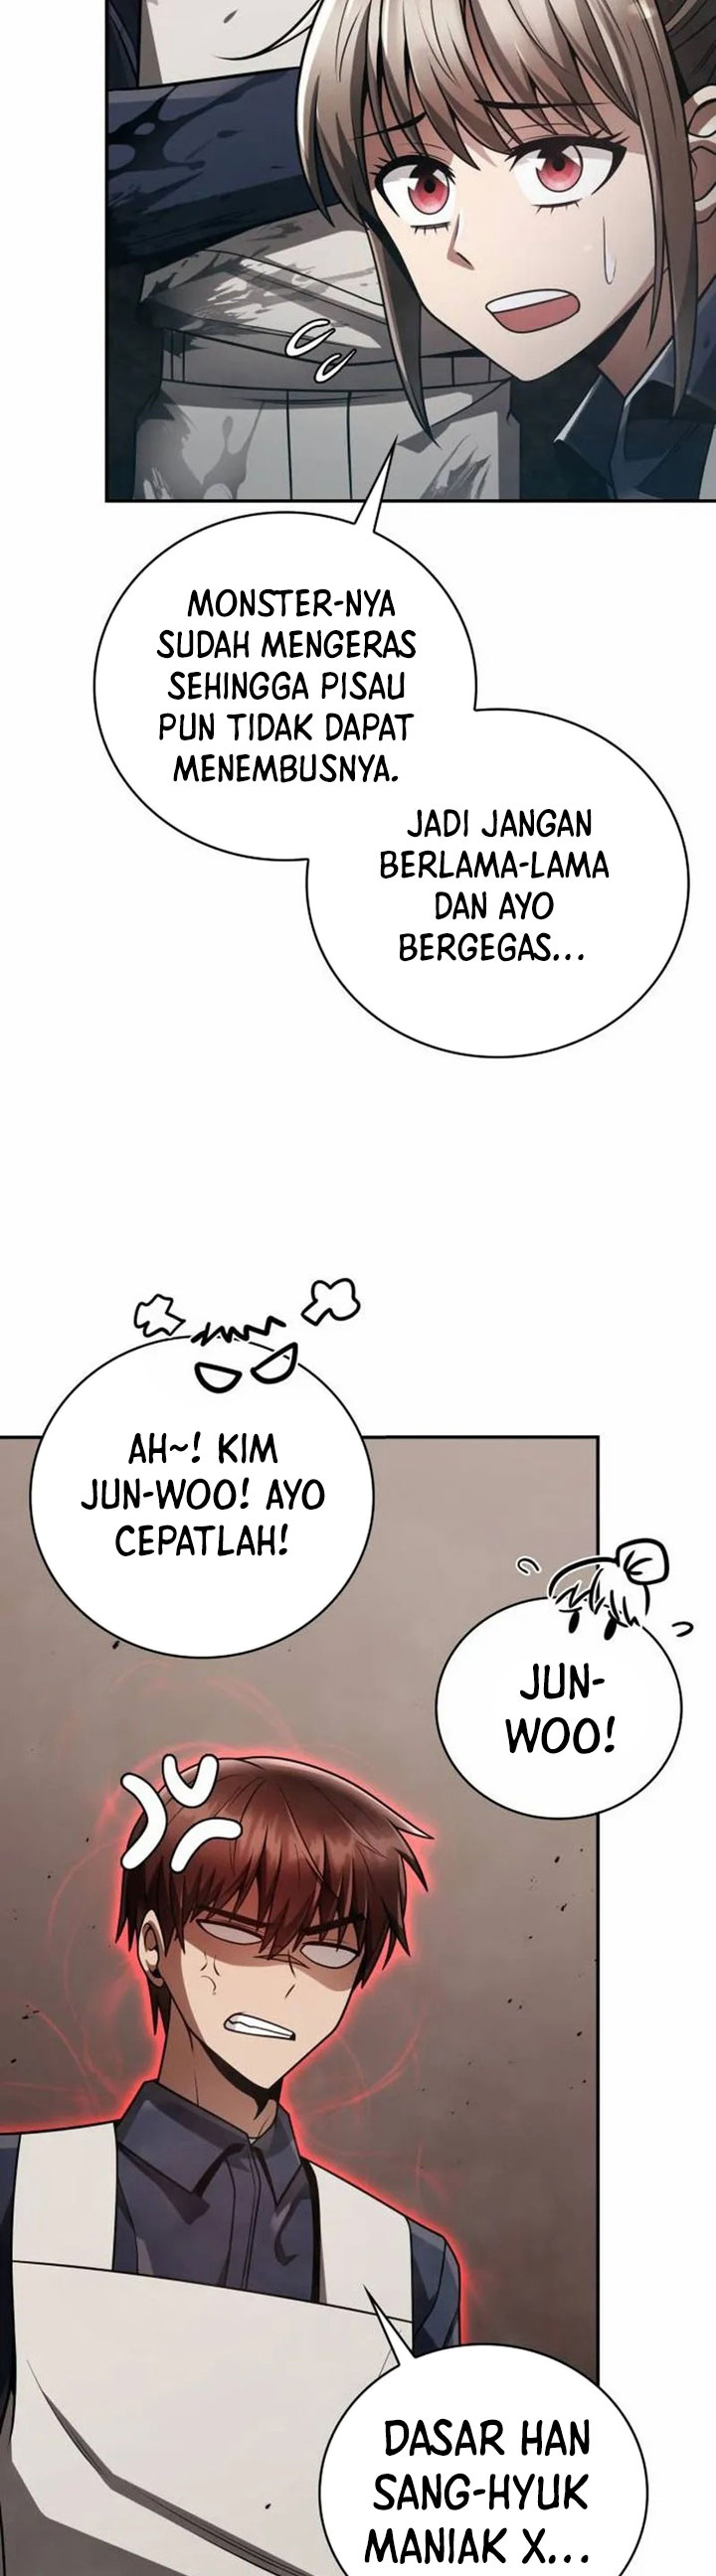 Dilarang COPAS - situs resmi www.mangacanblog.com - Komik clever cleaning life of the returned genius hunter 032 - chapter 32 33 Indonesia clever cleaning life of the returned genius hunter 032 - chapter 32 Terbaru 45|Baca Manga Komik Indonesia|Mangacan